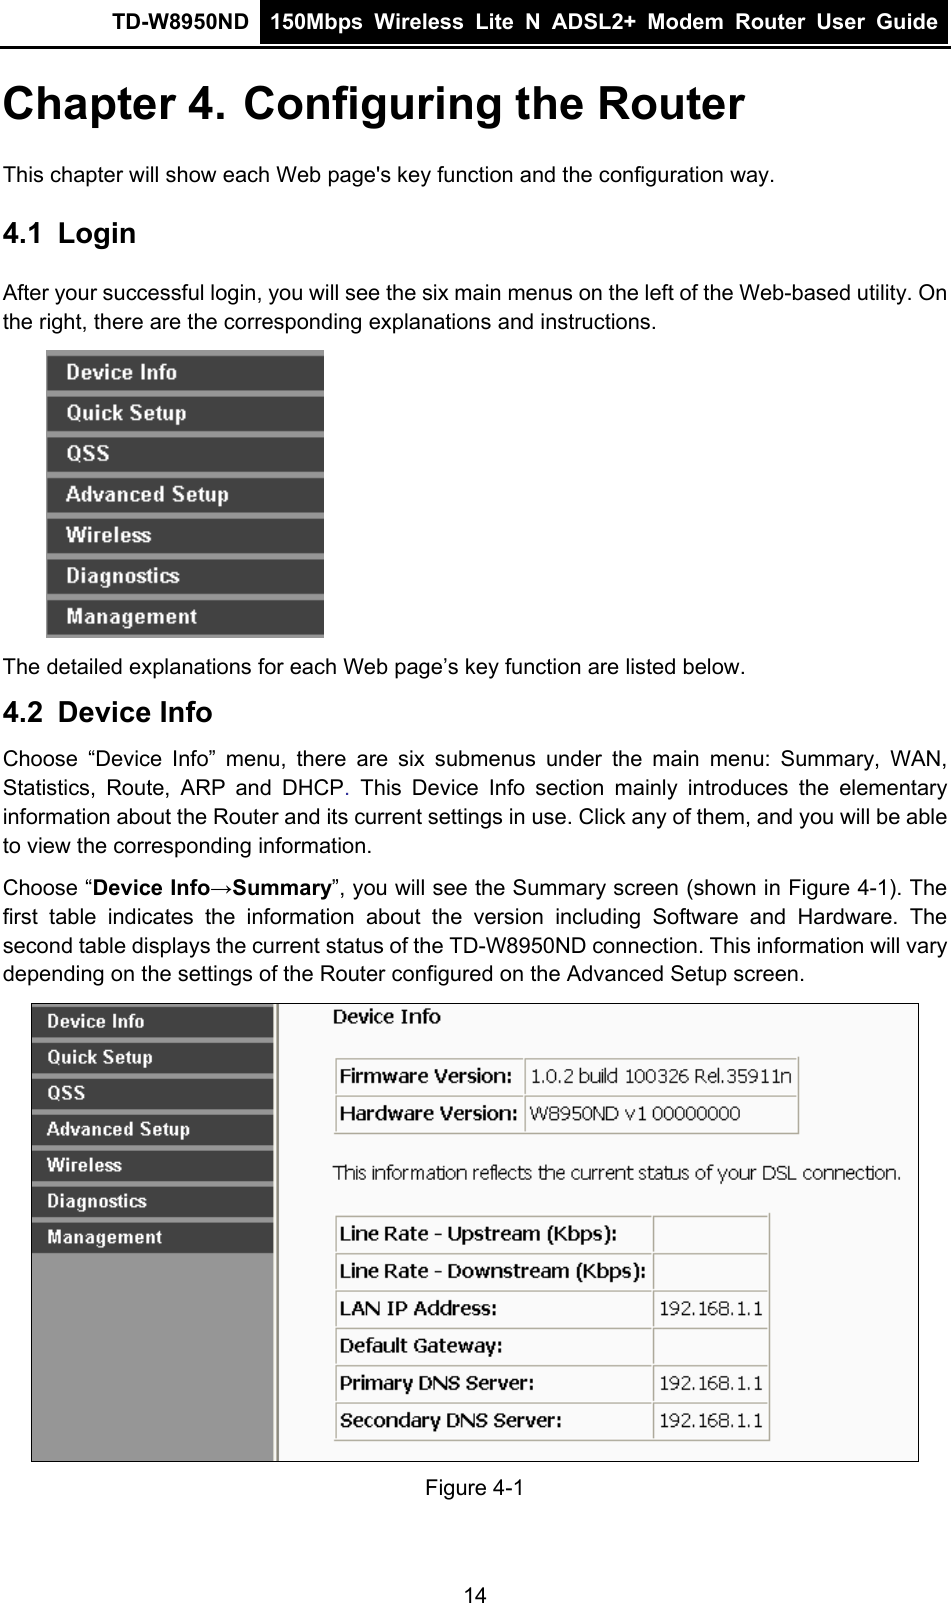 TD-W8950ND  150Mbps Wireless Lite N ADSL2+ Modem Router User Guide  Chapter 4. Configuring the Router This chapter will show each Web page&apos;s key function and the configuration way. 4.1  Login After your successful login, you will see the six main menus on the left of the Web-based utility. On the right, there are the corresponding explanations and instructions.  The detailed explanations for each Web page’s key function are listed below. 4.2  Device Info Choose “Device Info” menu, there are six submenus under the main menu: Summary, WAN, Statistics, Route, ARP and DHCP. This Device Info section mainly introduces the elementary information about the Router and its current settings in use. Click any of them, and you will be able to view the corresponding information. Choose “Device Info→Summary”, you will see the Summary screen (shown in Figure 4-1). The first table indicates the information about the version including Software and Hardware. The second table displays the current status of the TD-W8950ND connection. This information will vary depending on the settings of the Router configured on the Advanced Setup screen.  Figure 4-1 14 